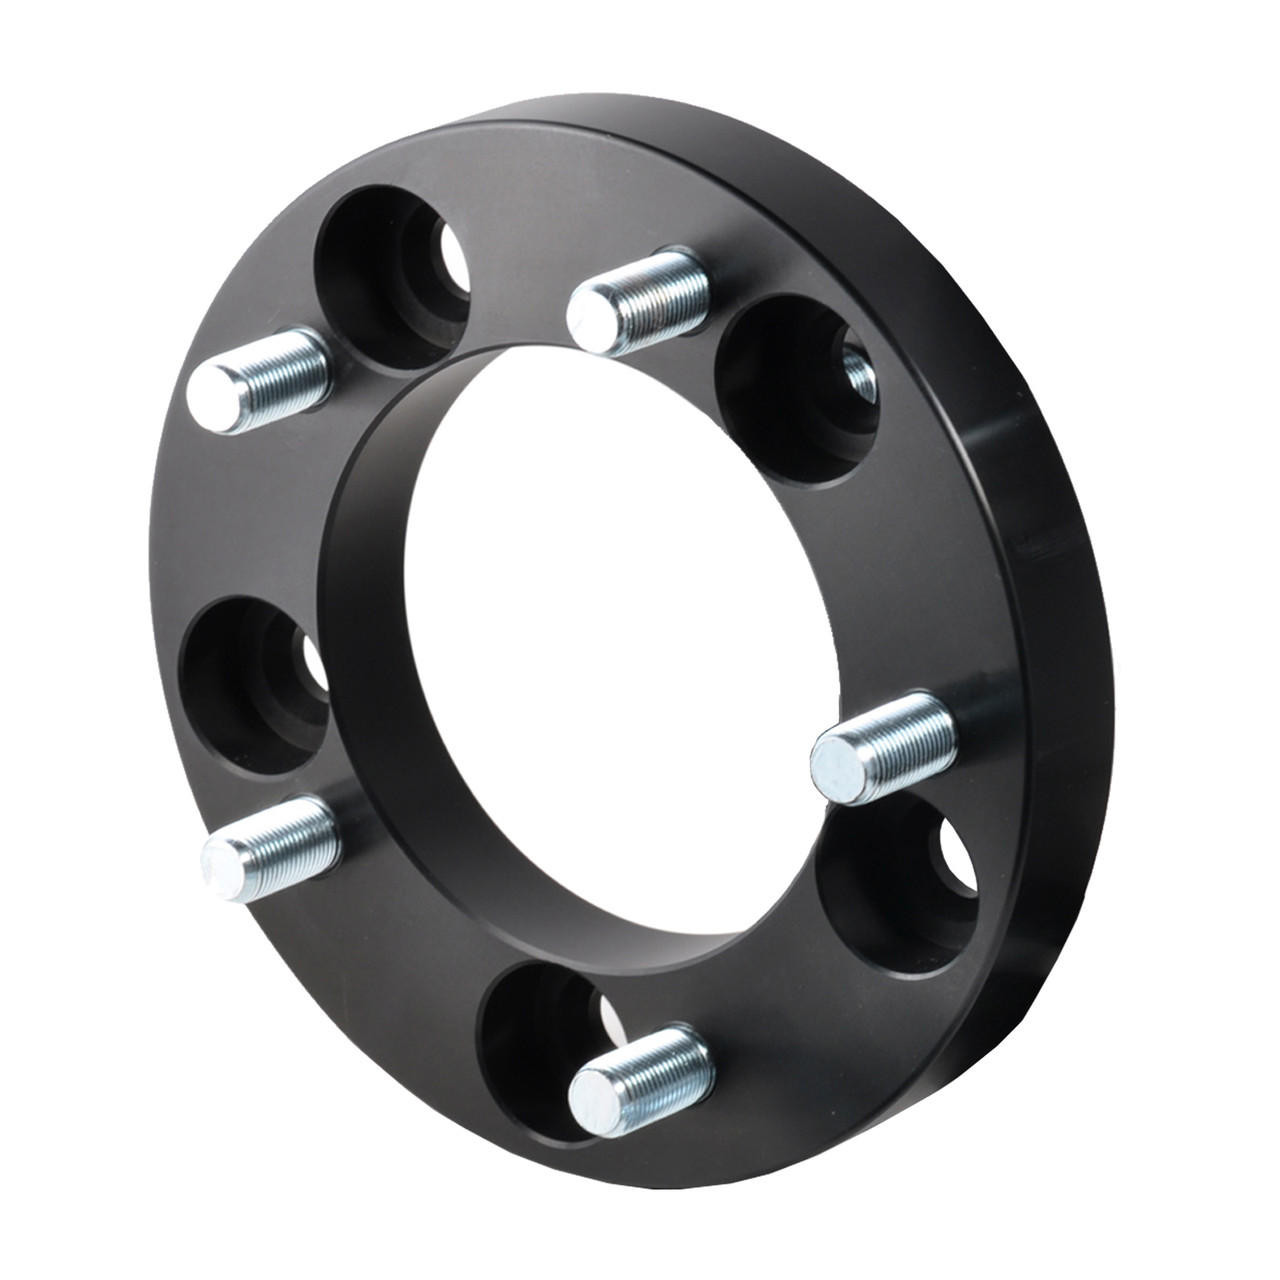  Bulldog Wheel Spacers for Land Rover Defender, Discovery 1 & RRC Non Hub Centric (30mm) Single Unit